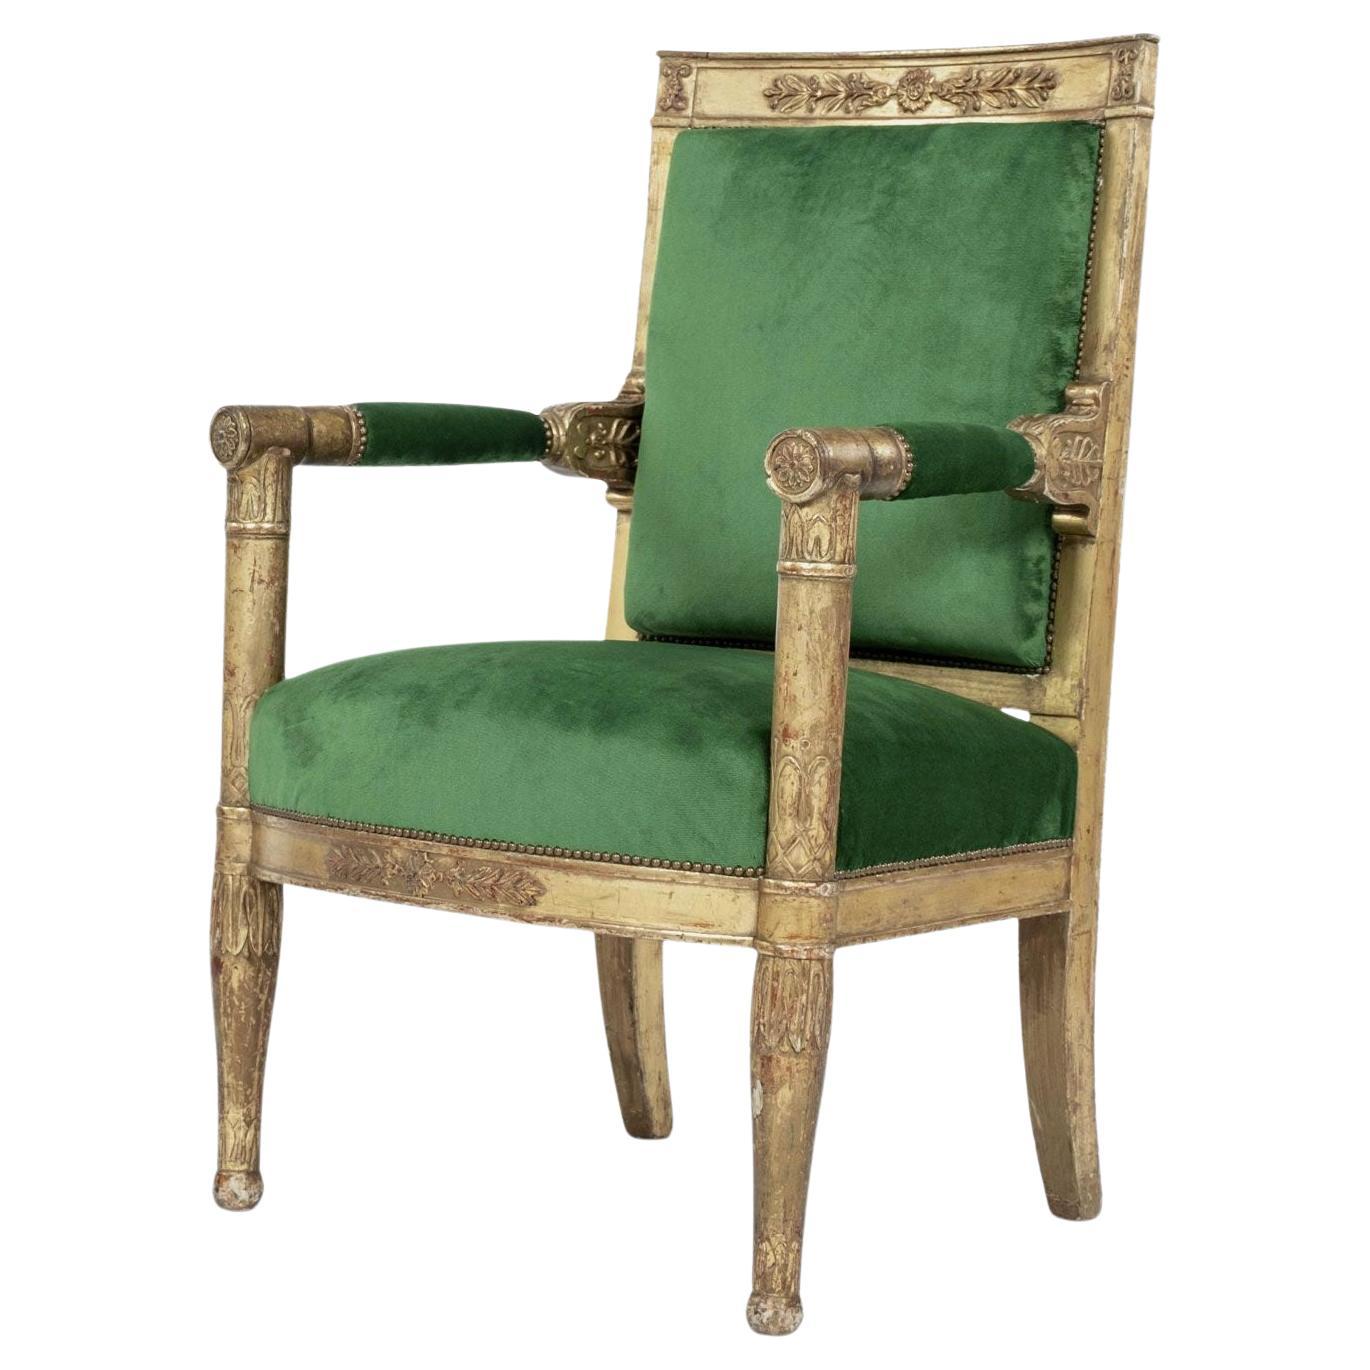 French Empire Giltwood Fauteuil Armchair